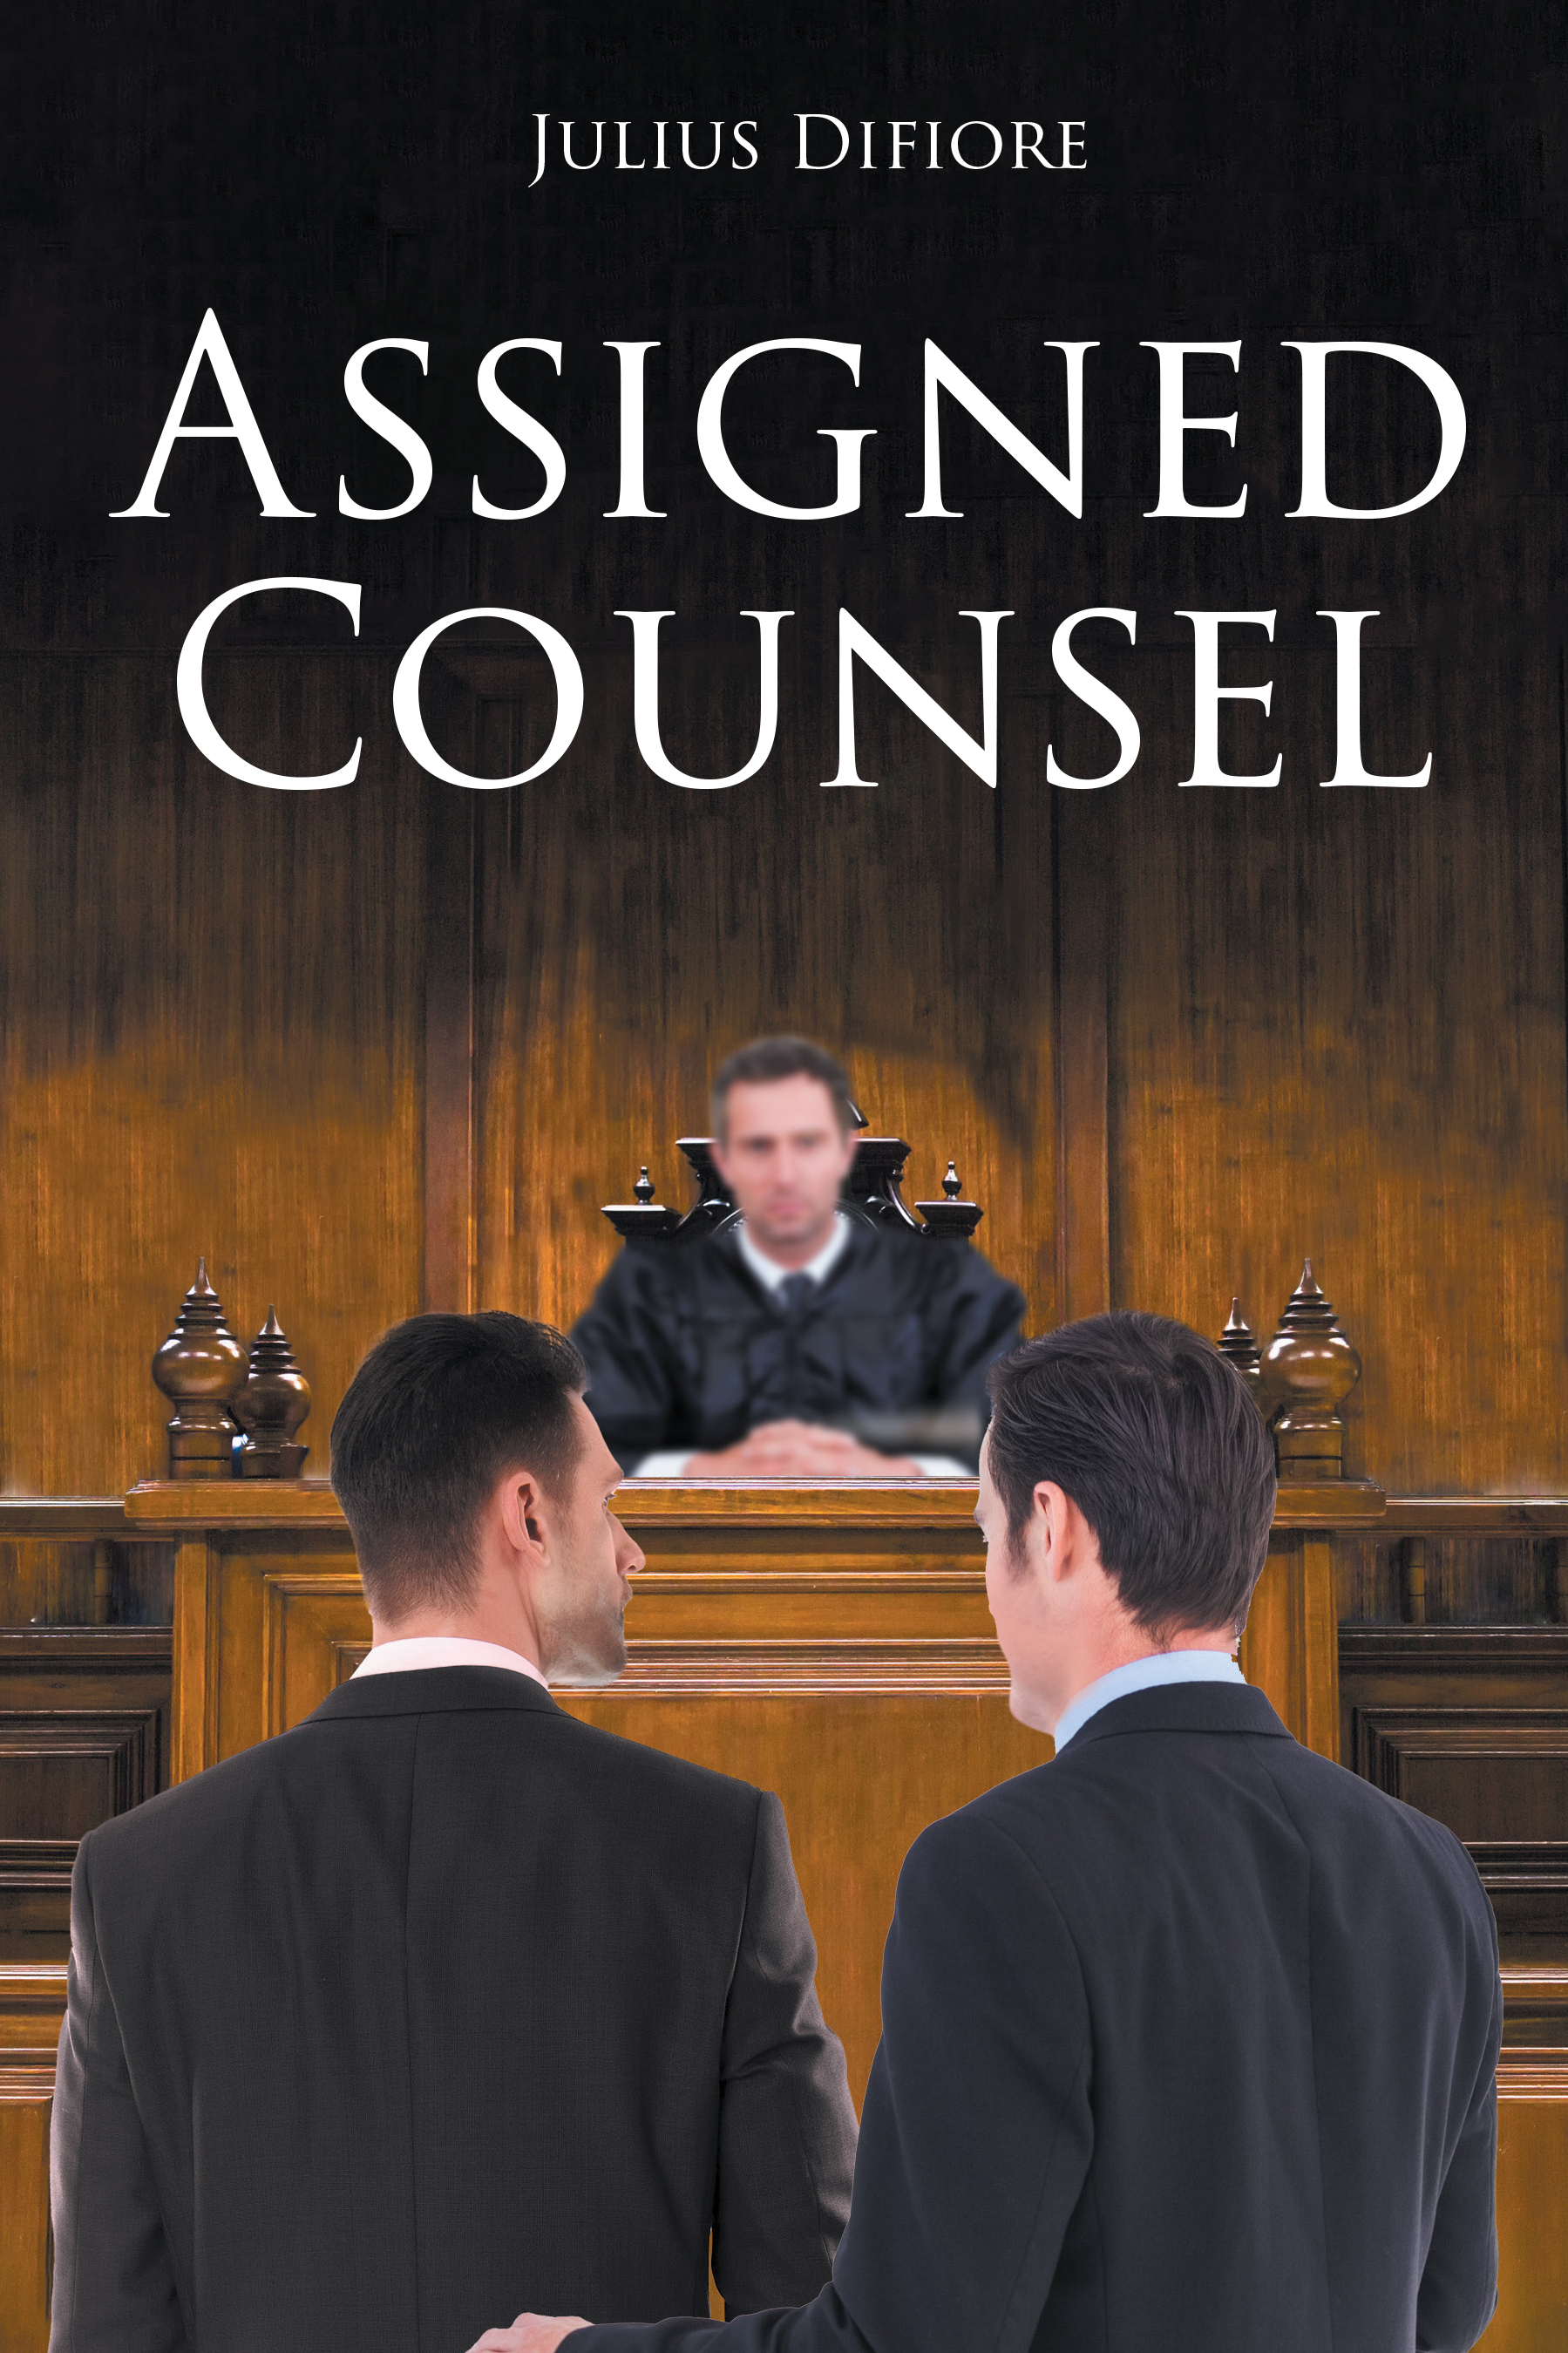 Author Julius Difiore’s New Book, "Assigned Counsel," is the Story of a High Profile Criminal Case That May Have More to It Than Meets the Eye